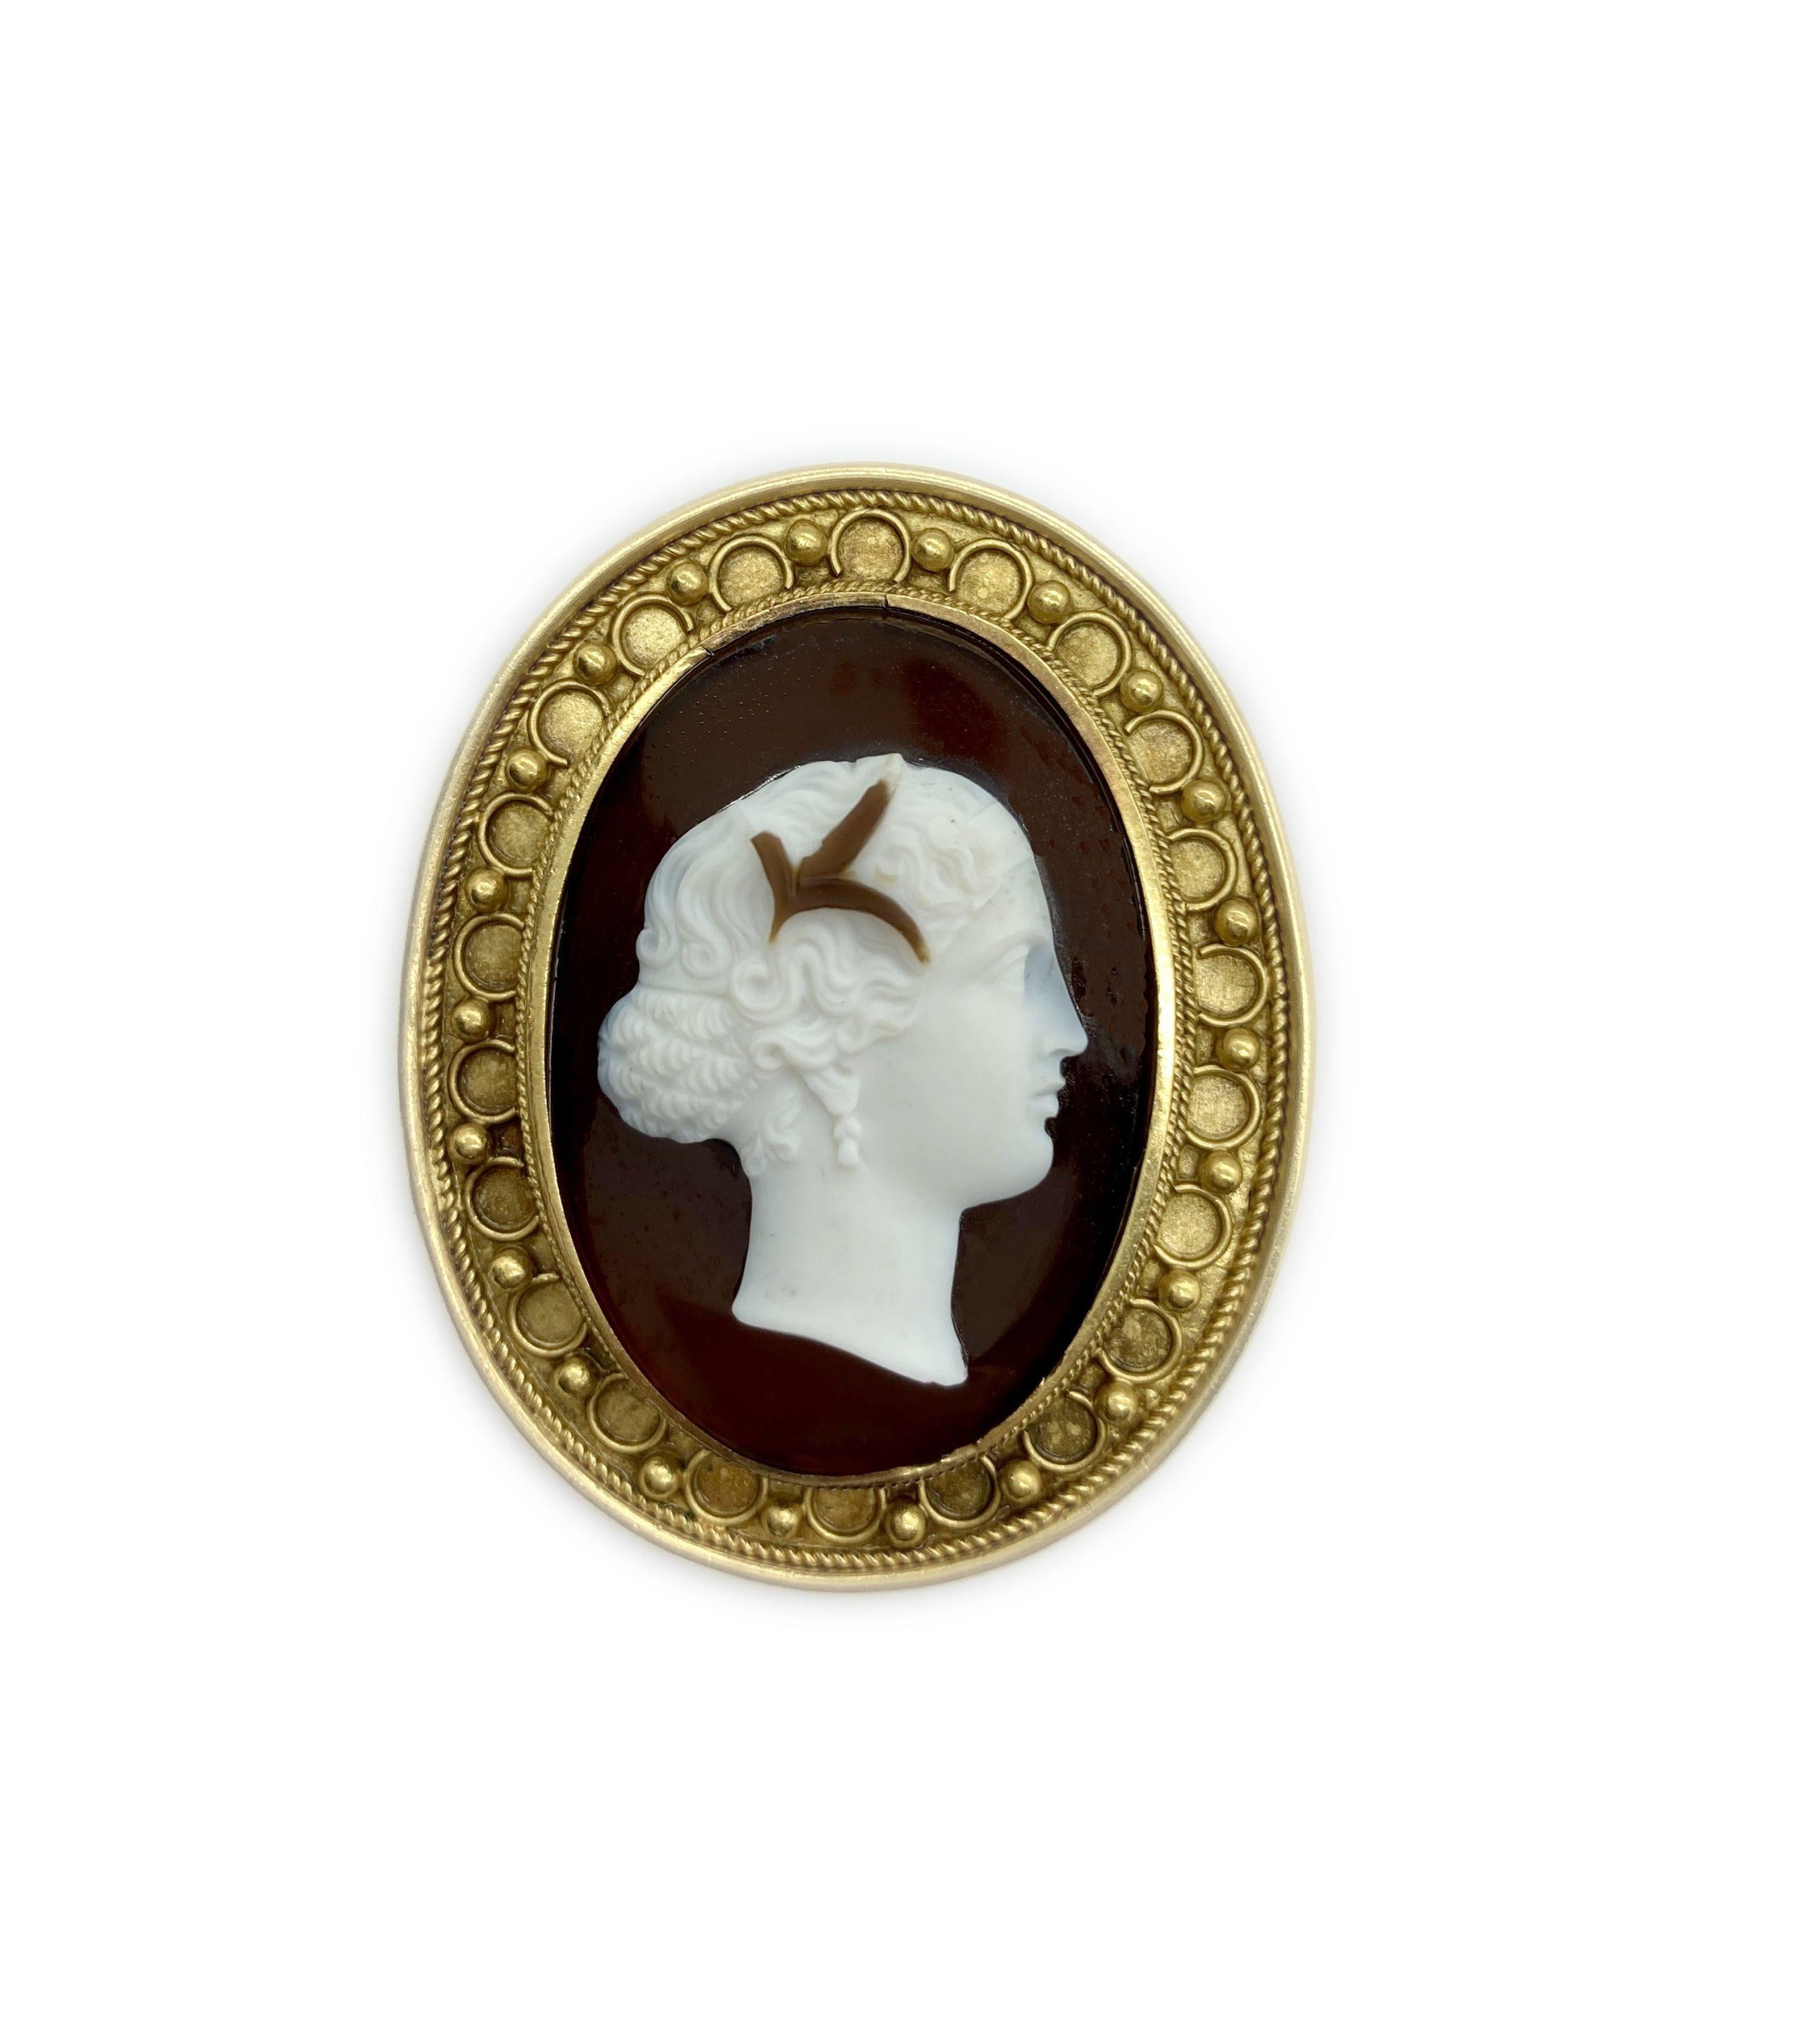 find out where to obtain the ivory coin brooch